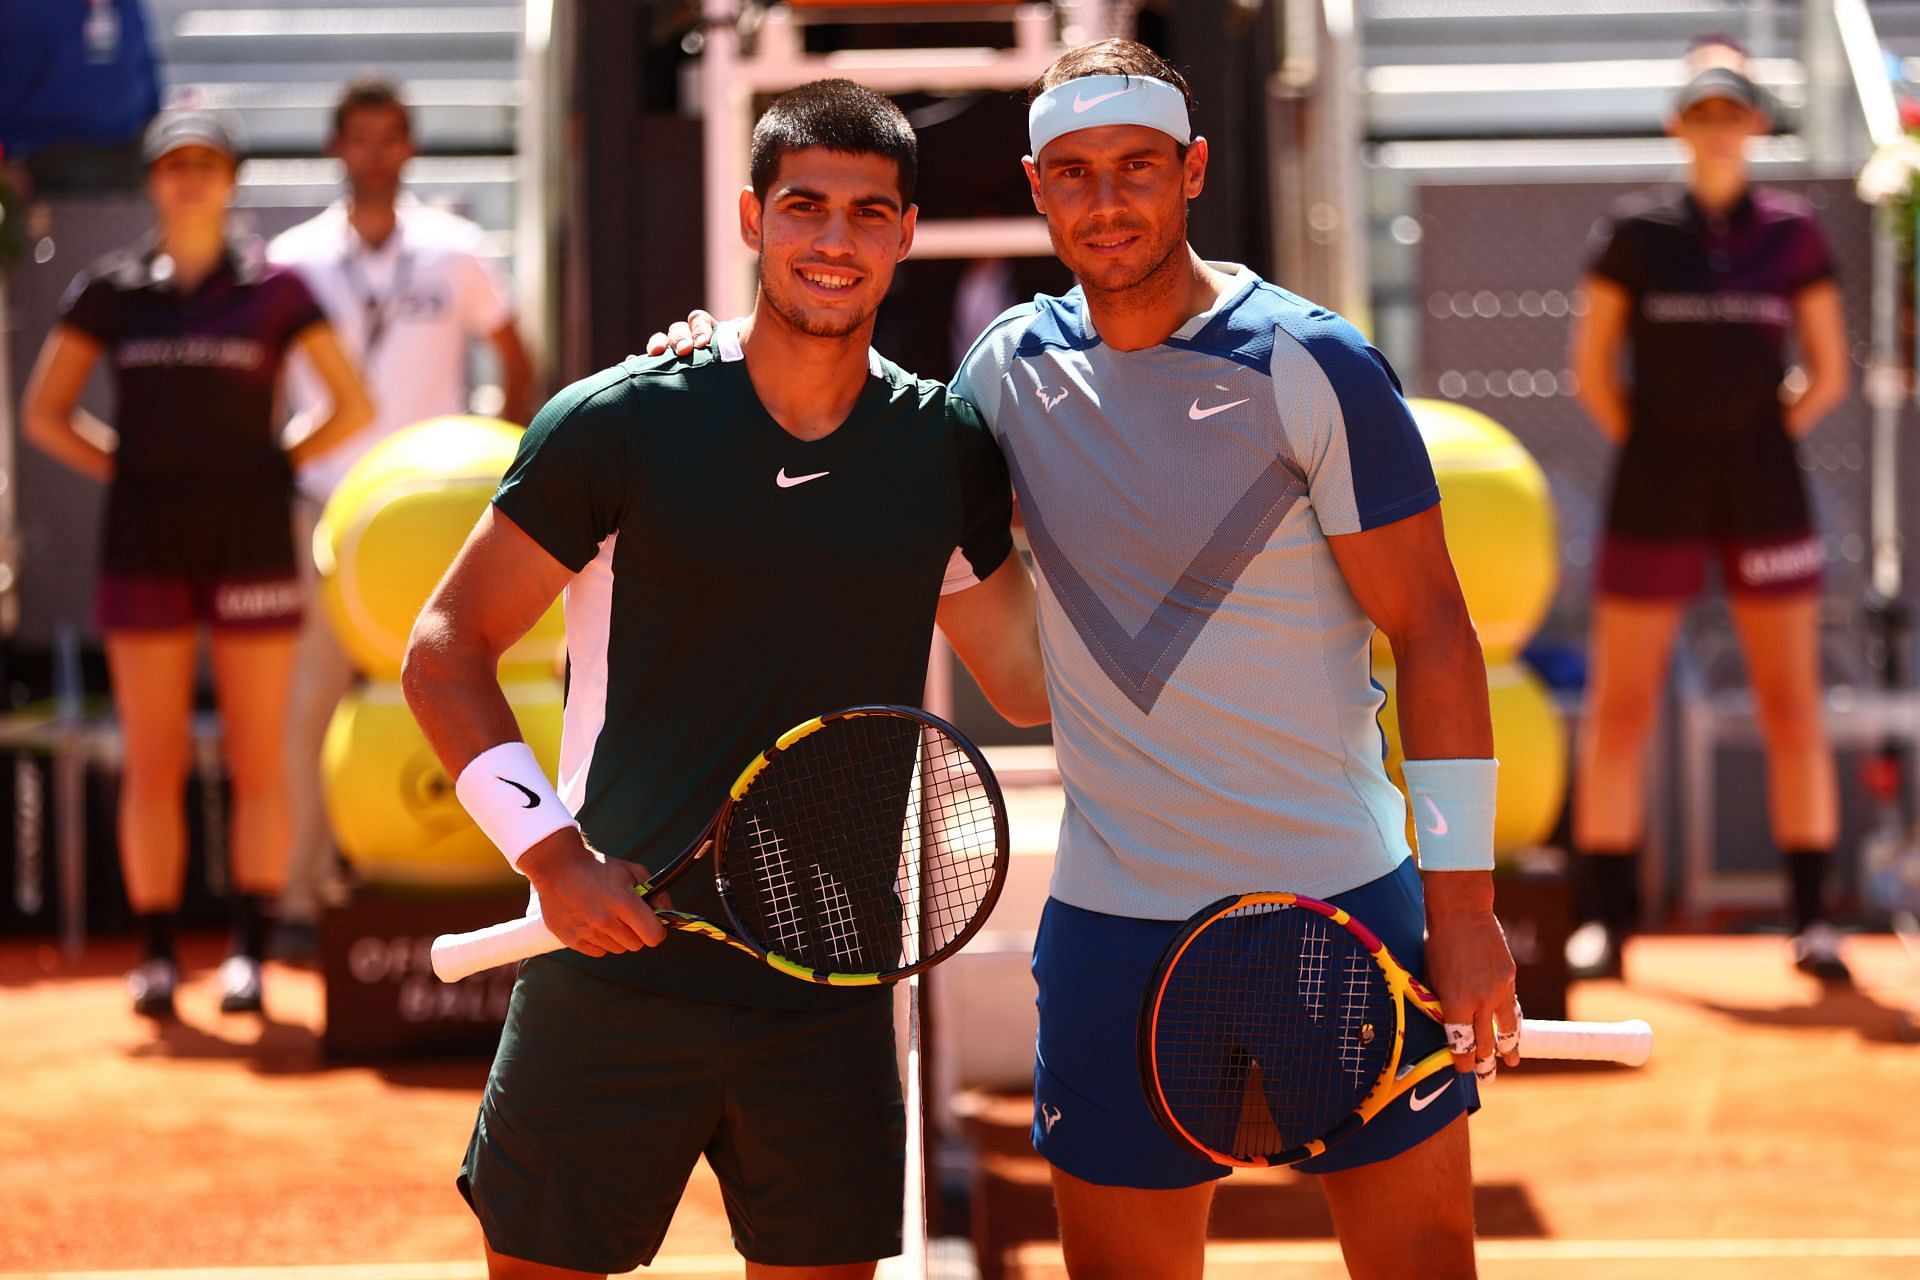 Carlos Alcaraz (L) and Rafael Nadal ahead of their match at the 2022 Madrid Open